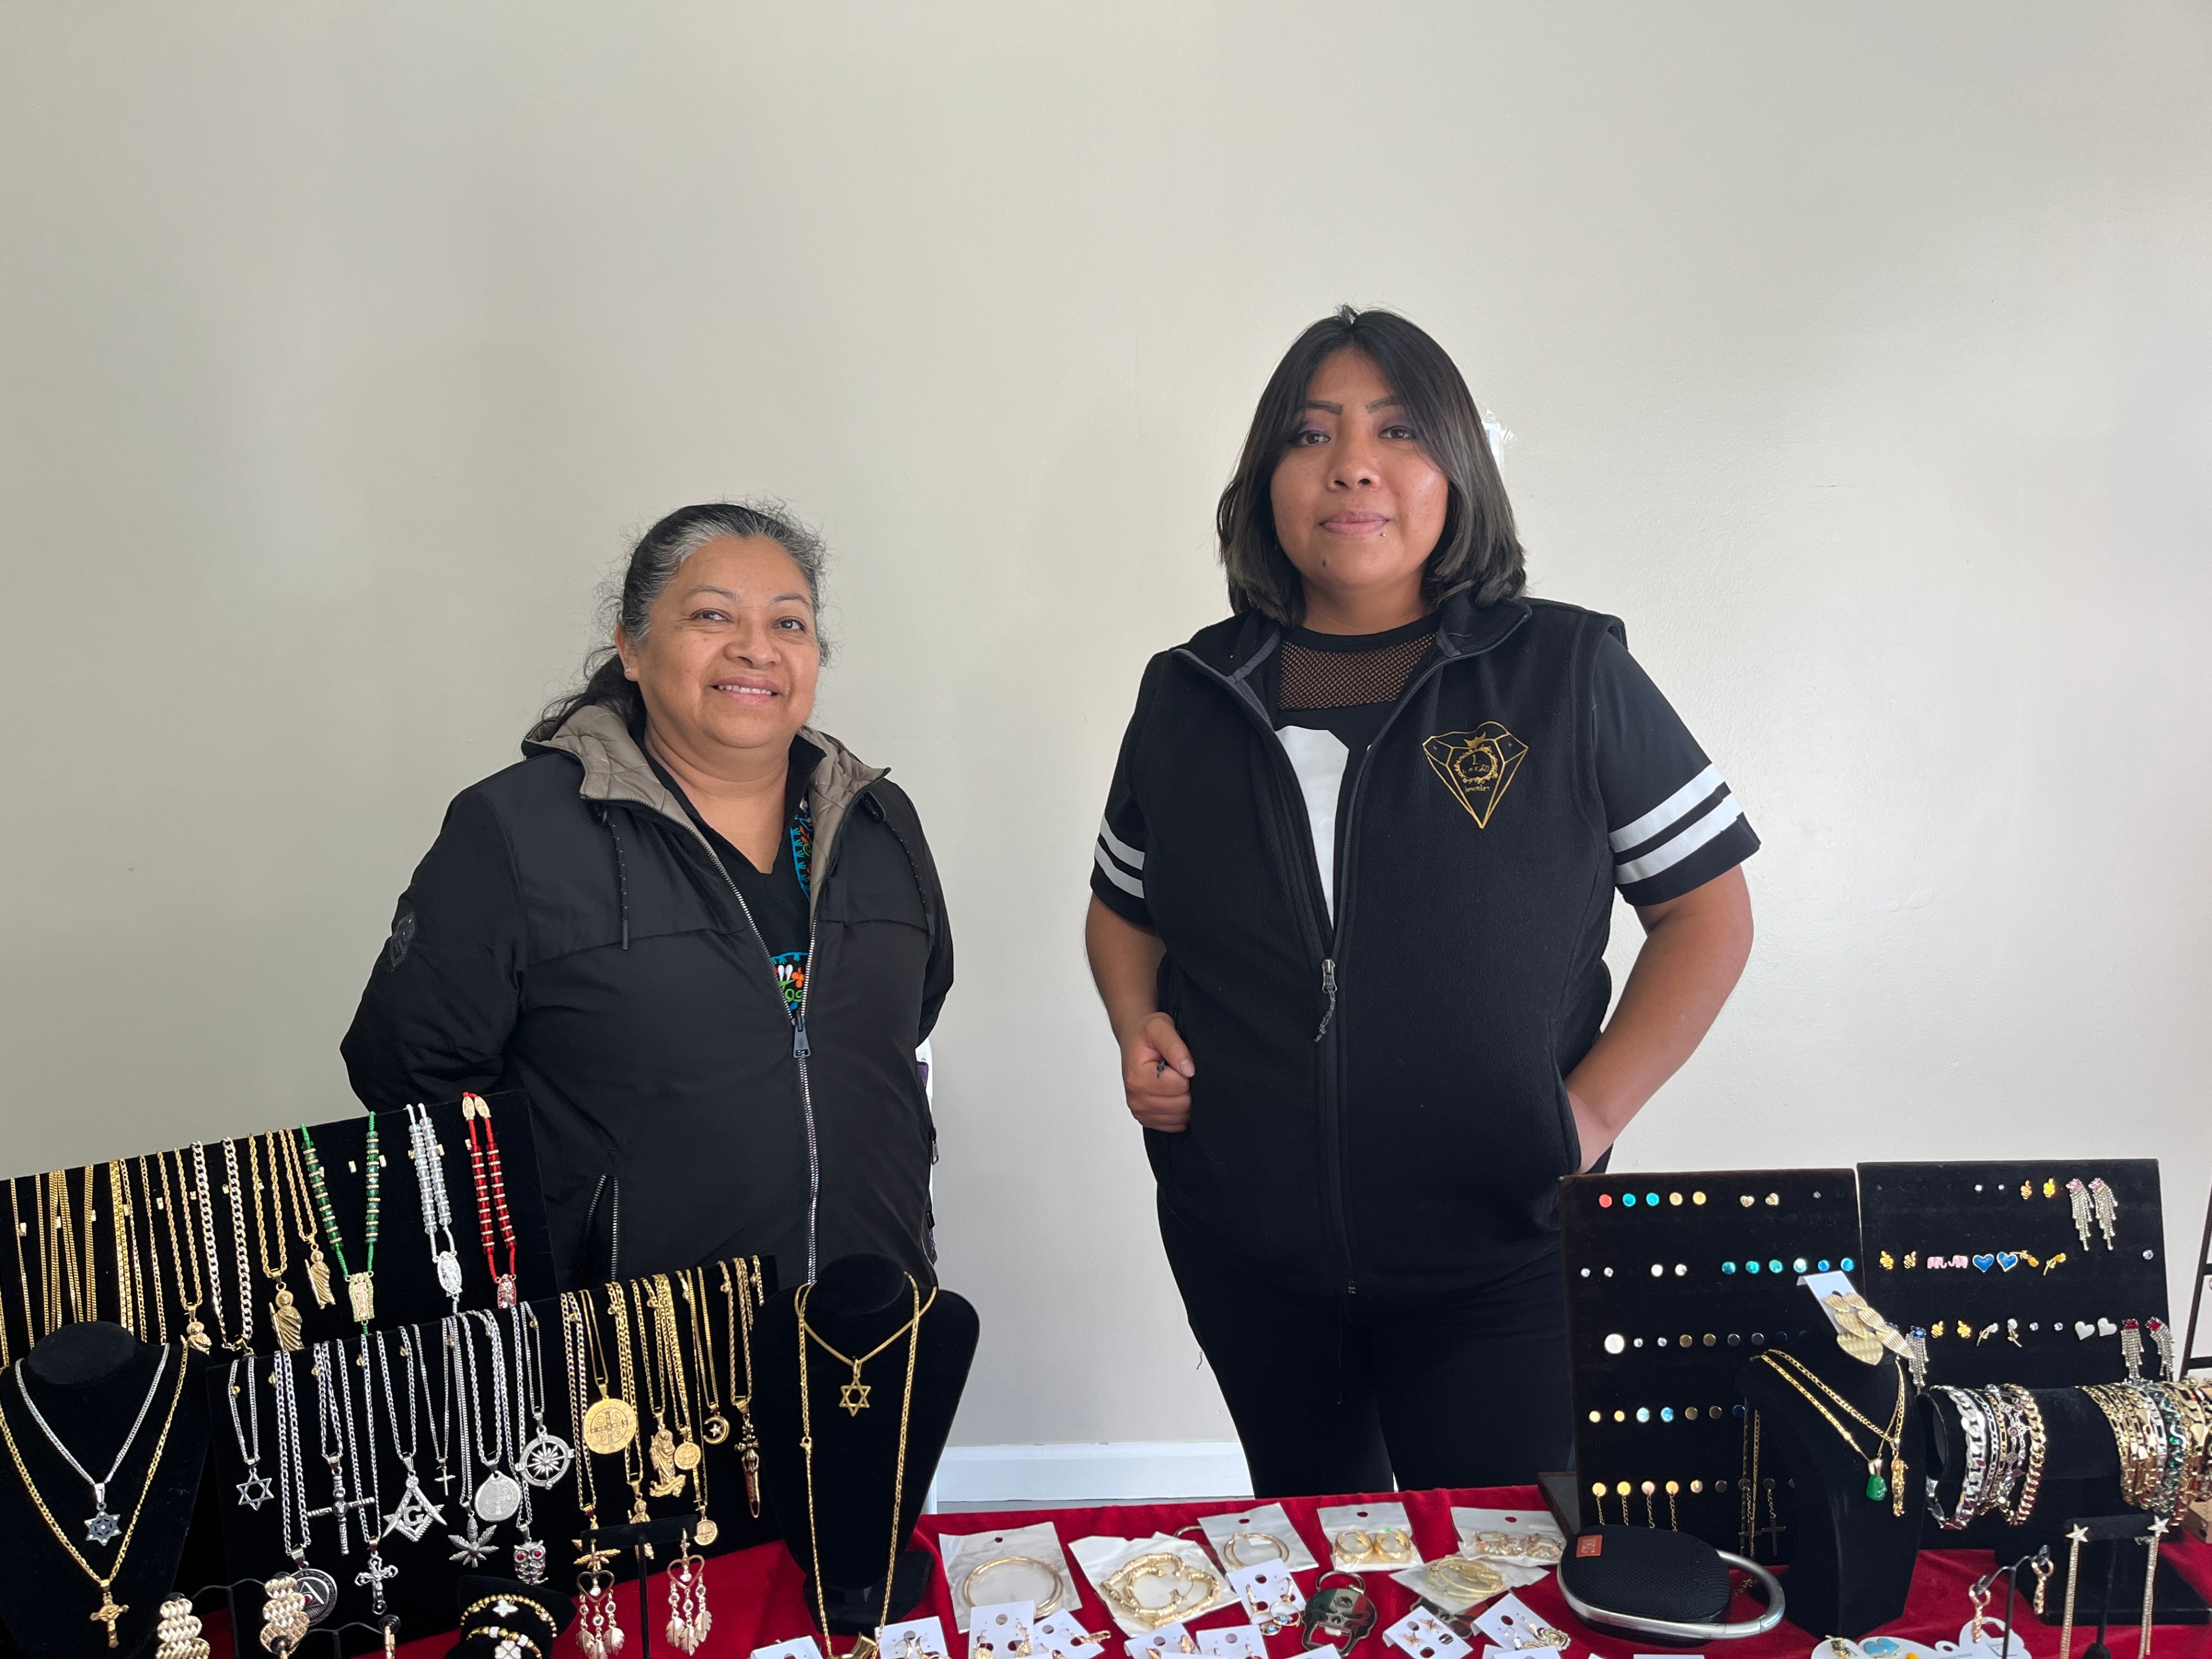 An older woman stands next to a younger woman behind a table with silver and gold jewelry